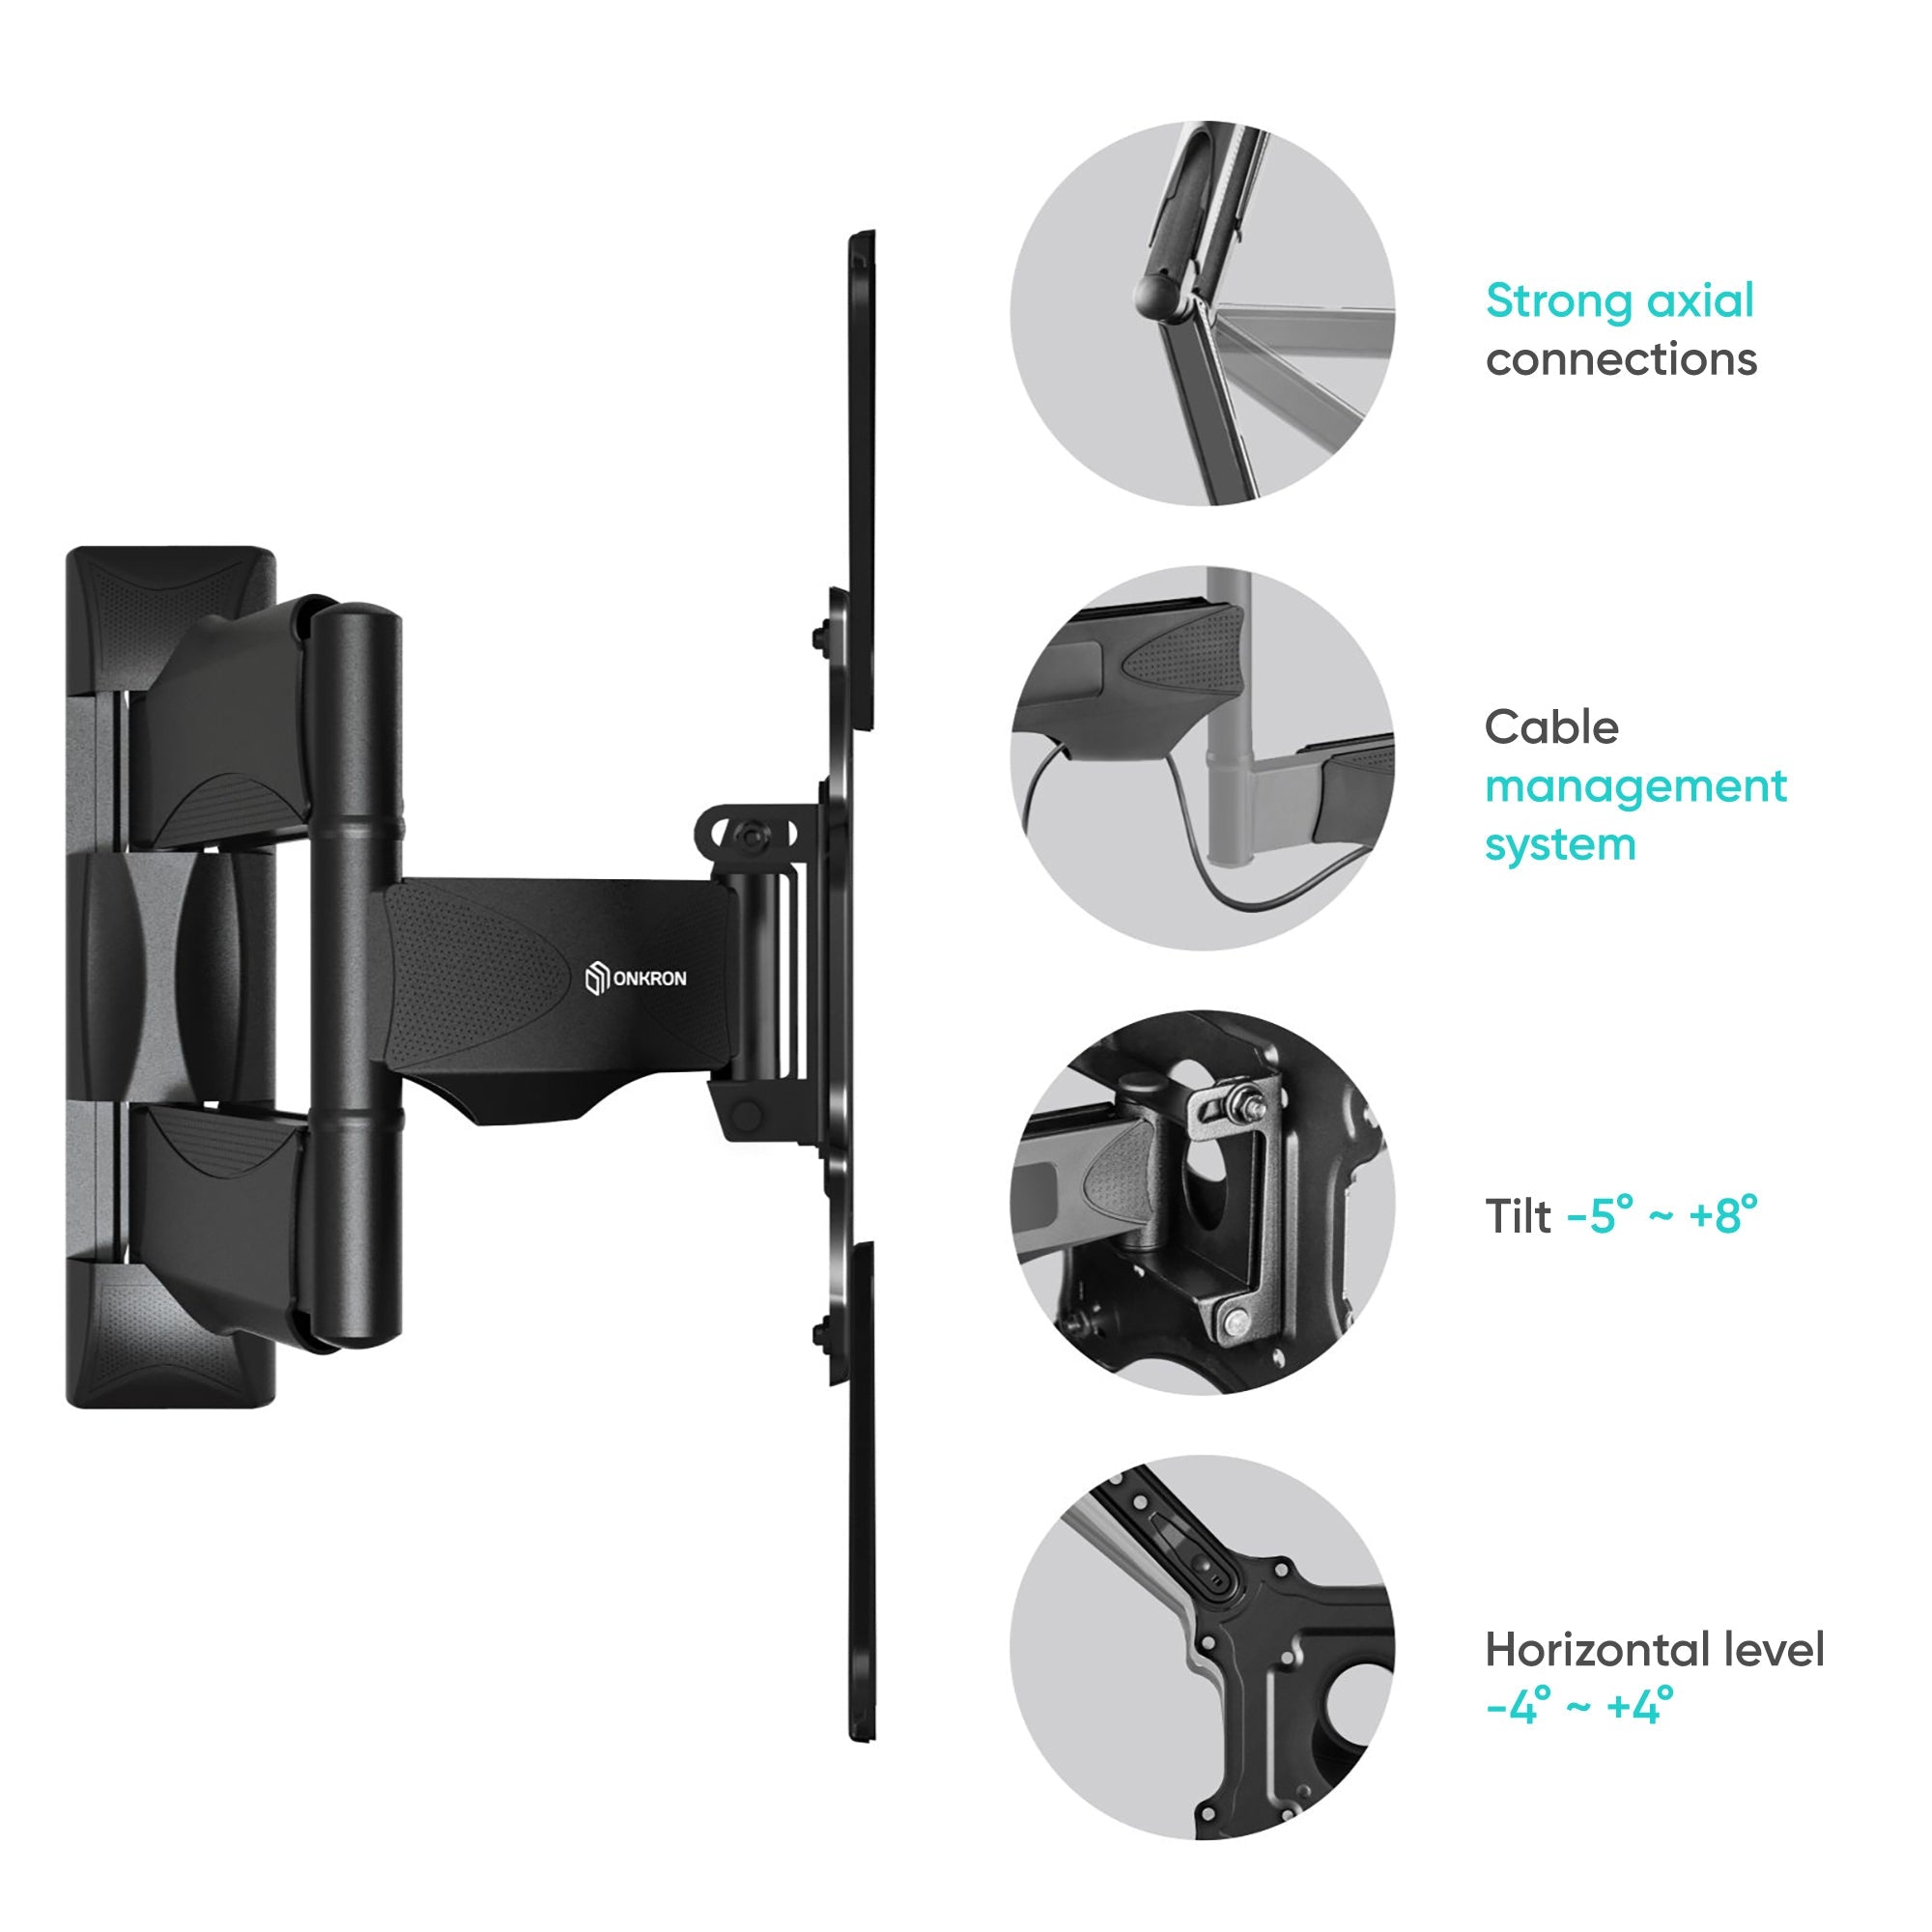 Full Motion TV Wall Mount for 32" to 55-inch Screens up to 77 lbs ONKRON M4, Black